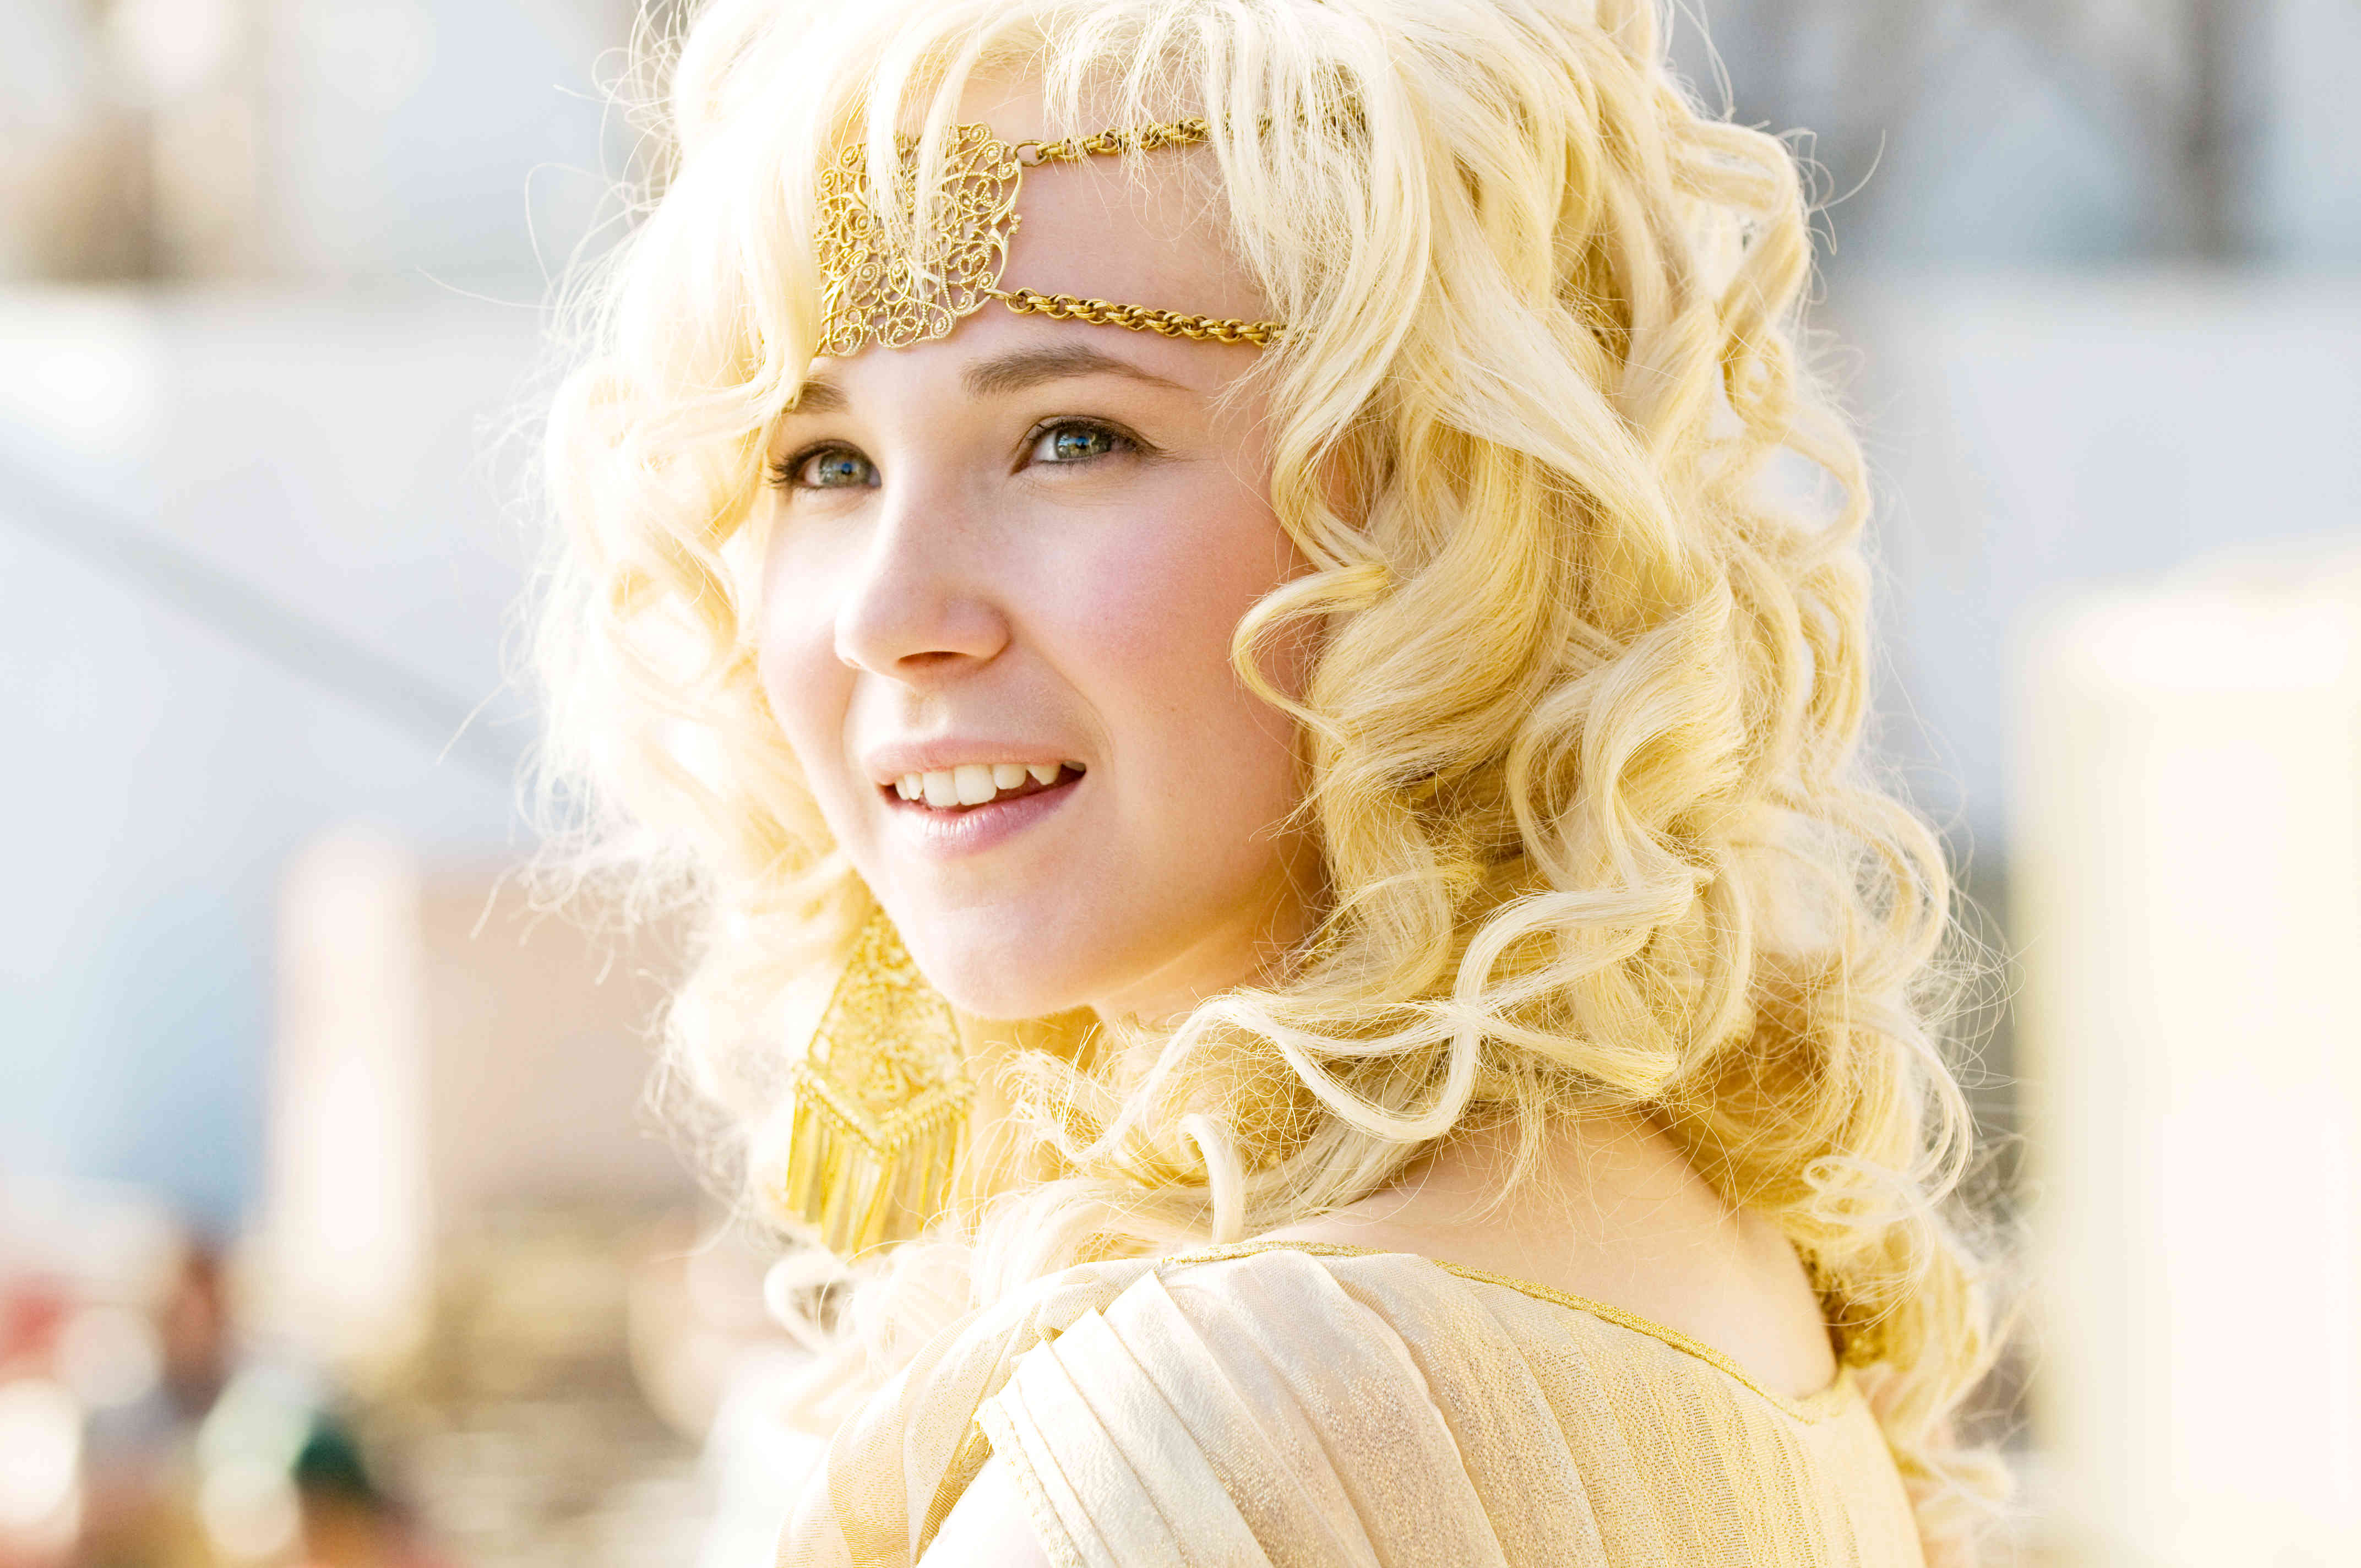 Juno Temple stars as Eema in Columbia Pictures' Year One (2009)